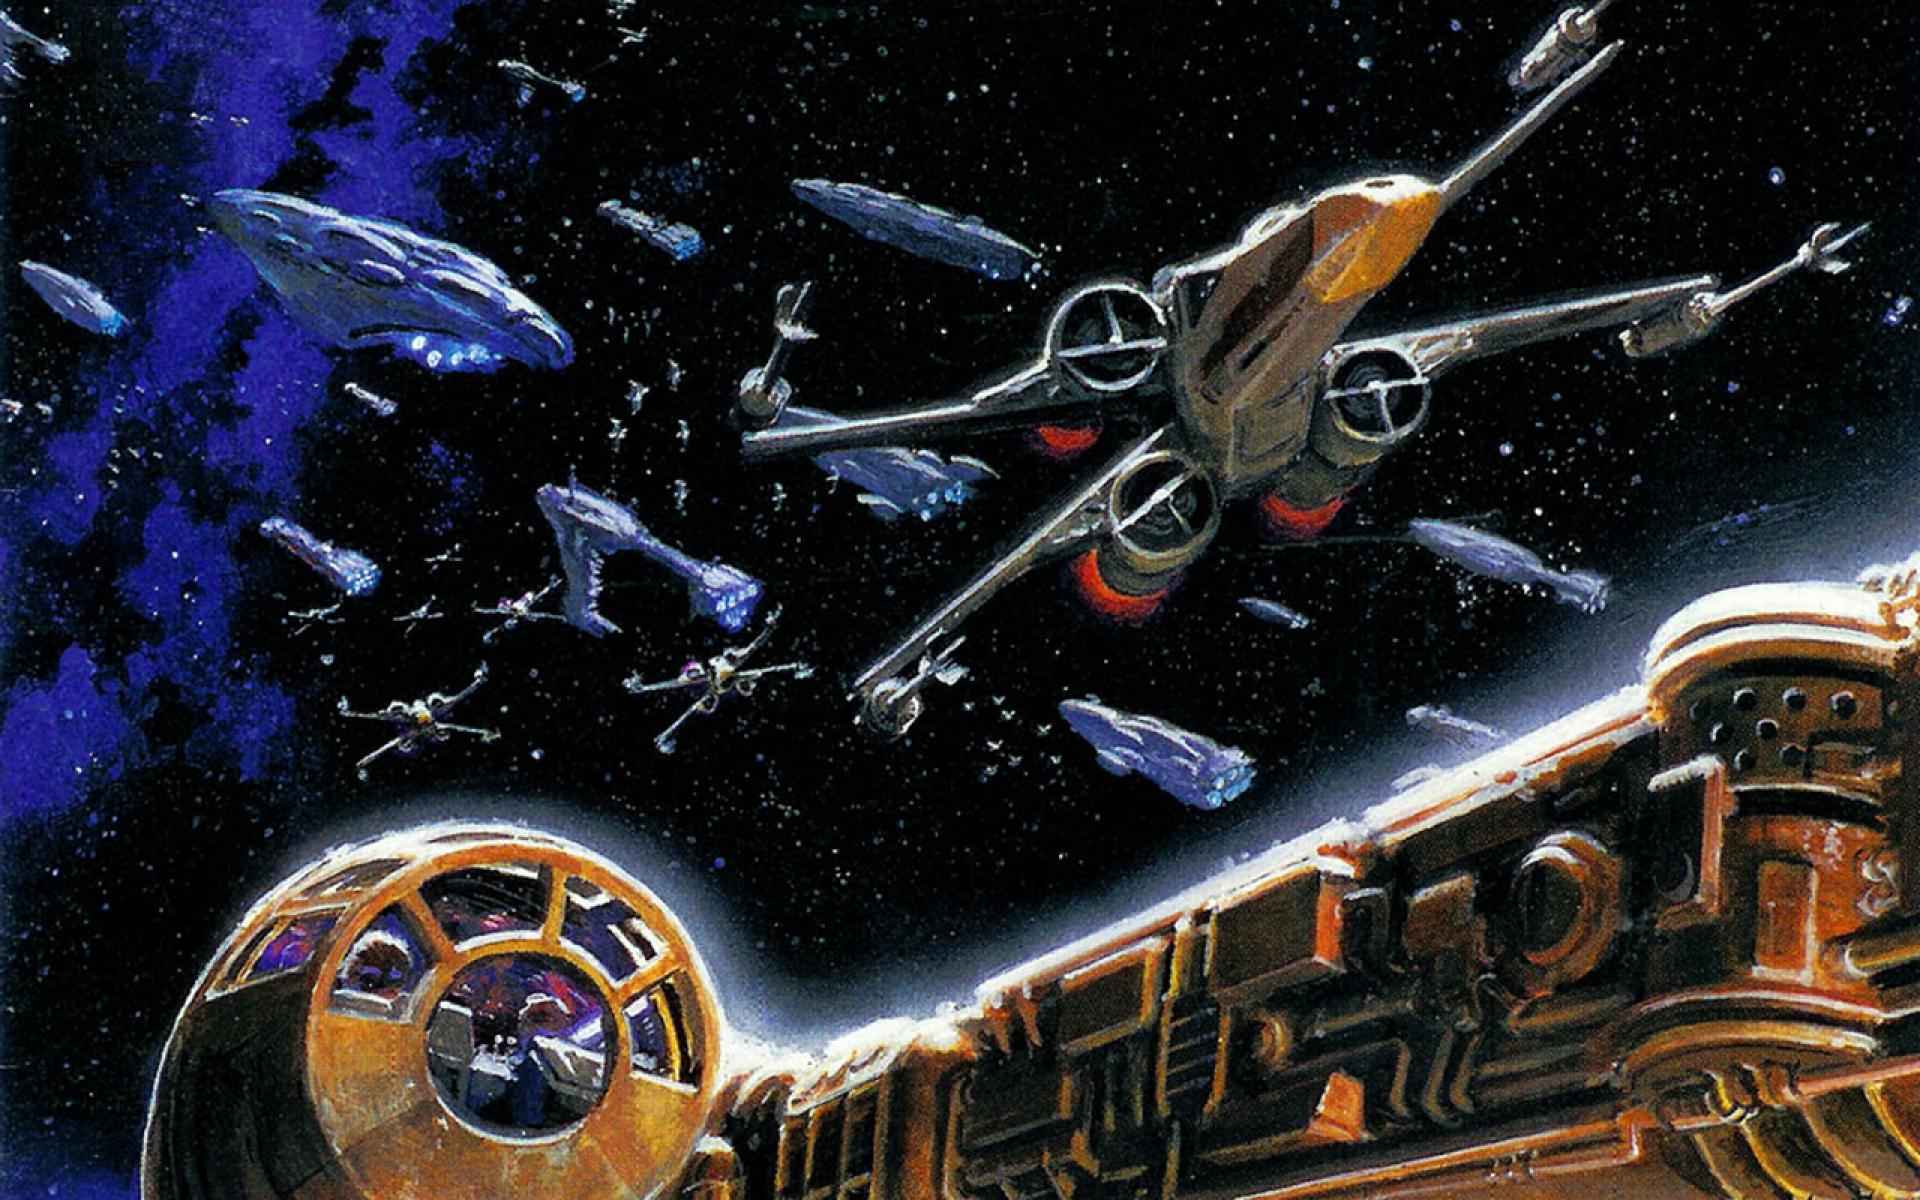 Star wars,millennium falcon,battles,xwing,outer space background